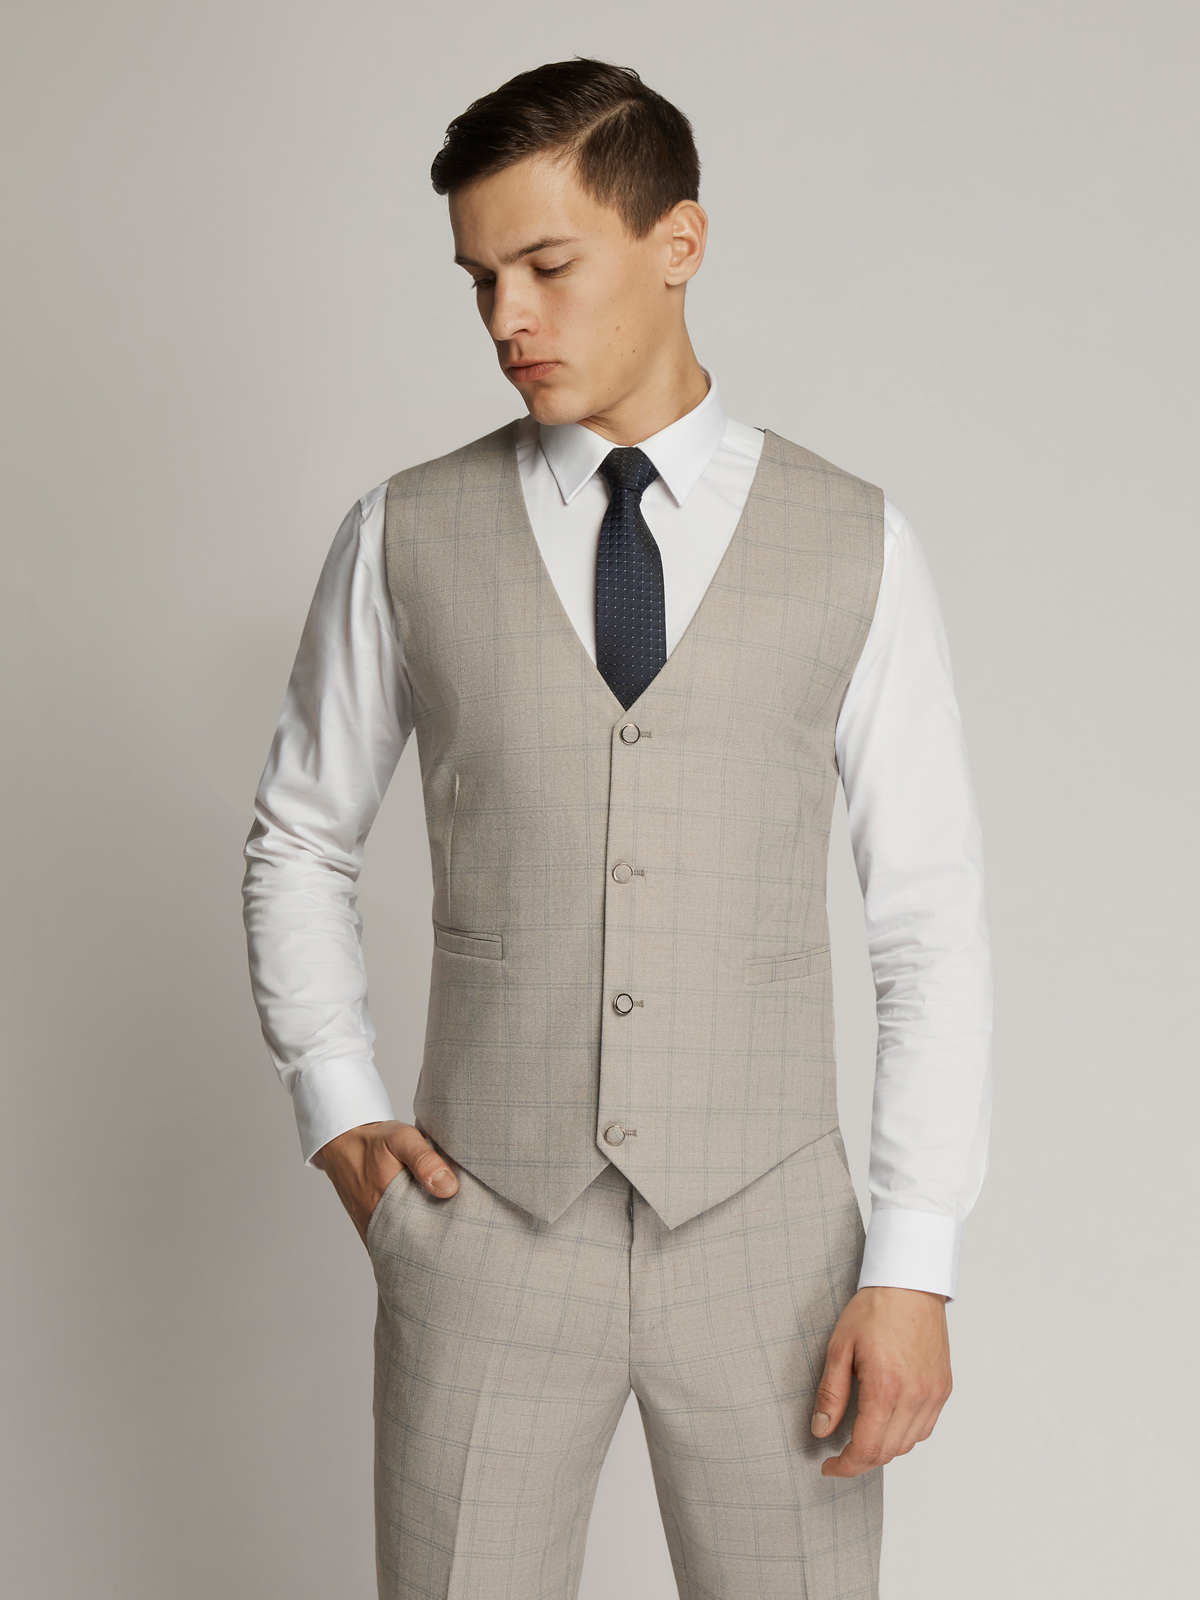 FRENCH CONNECTION  Slim Fit Light Grey Flannel Waistcoat  Moss Box